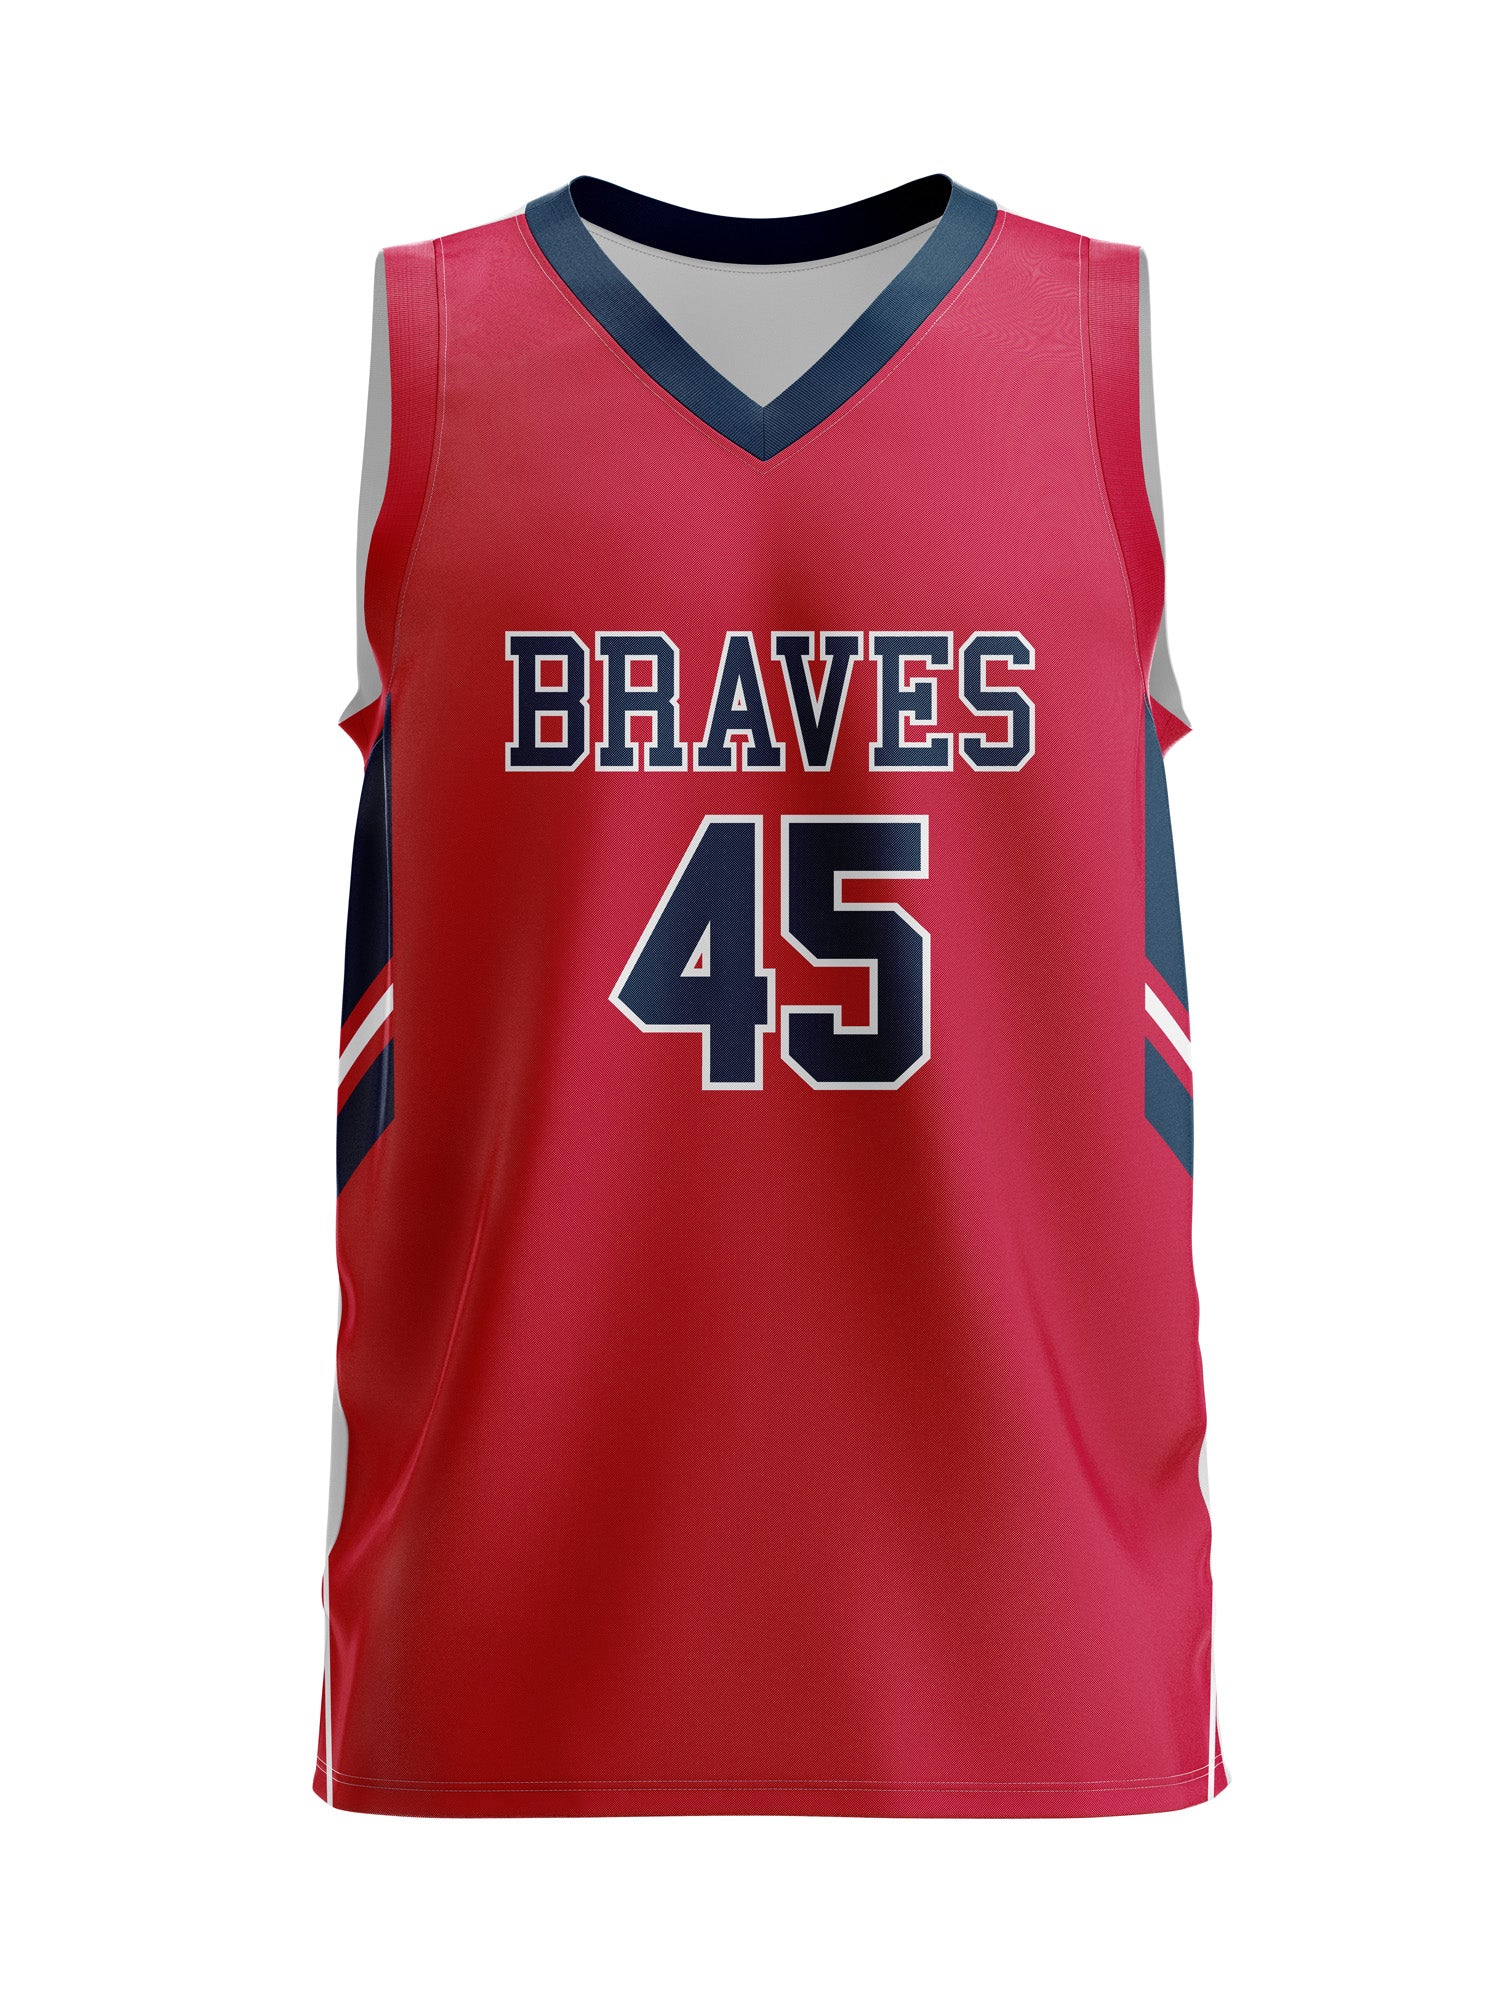 MANALAPAN HS BASKETBALL RED GAME JERSEY